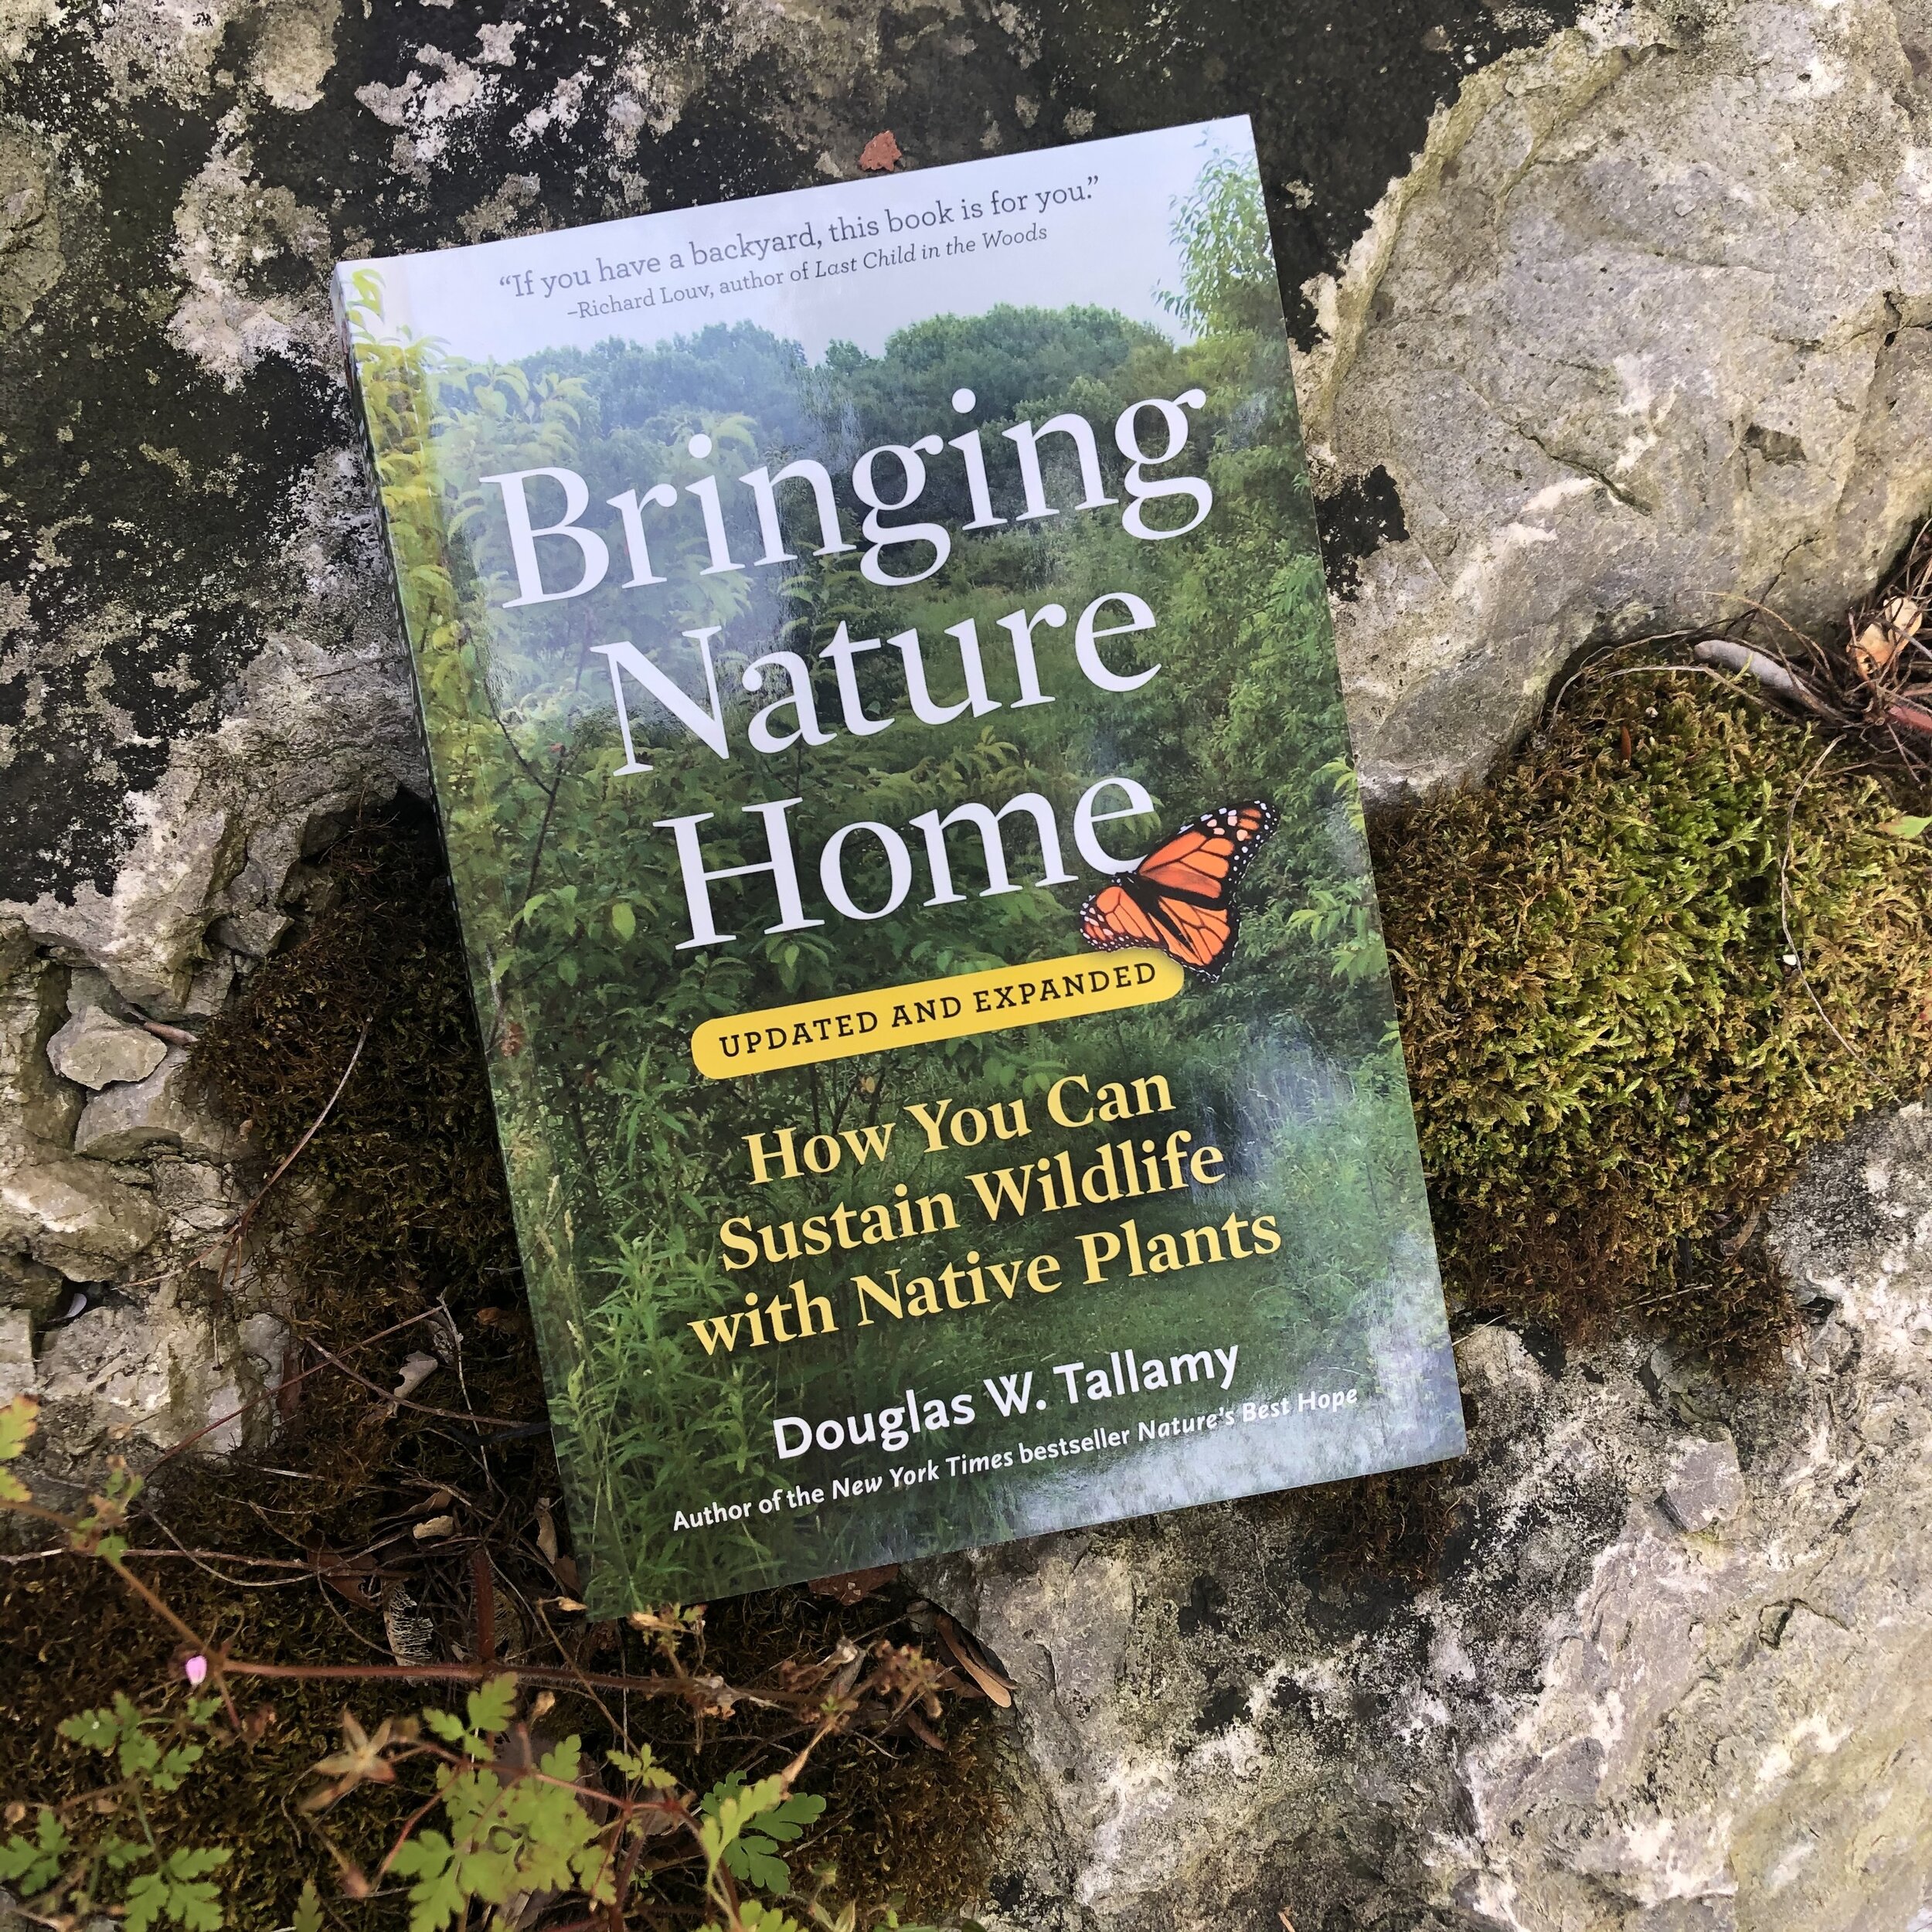 Douglas Tallamy strikes the perfect compromise between fear and optimism in “Bringing Nature Home: How You Can Sustain Wildlife with Native Plants. It’s a must read for anyone who cares about the future of our environment at both a global and local …